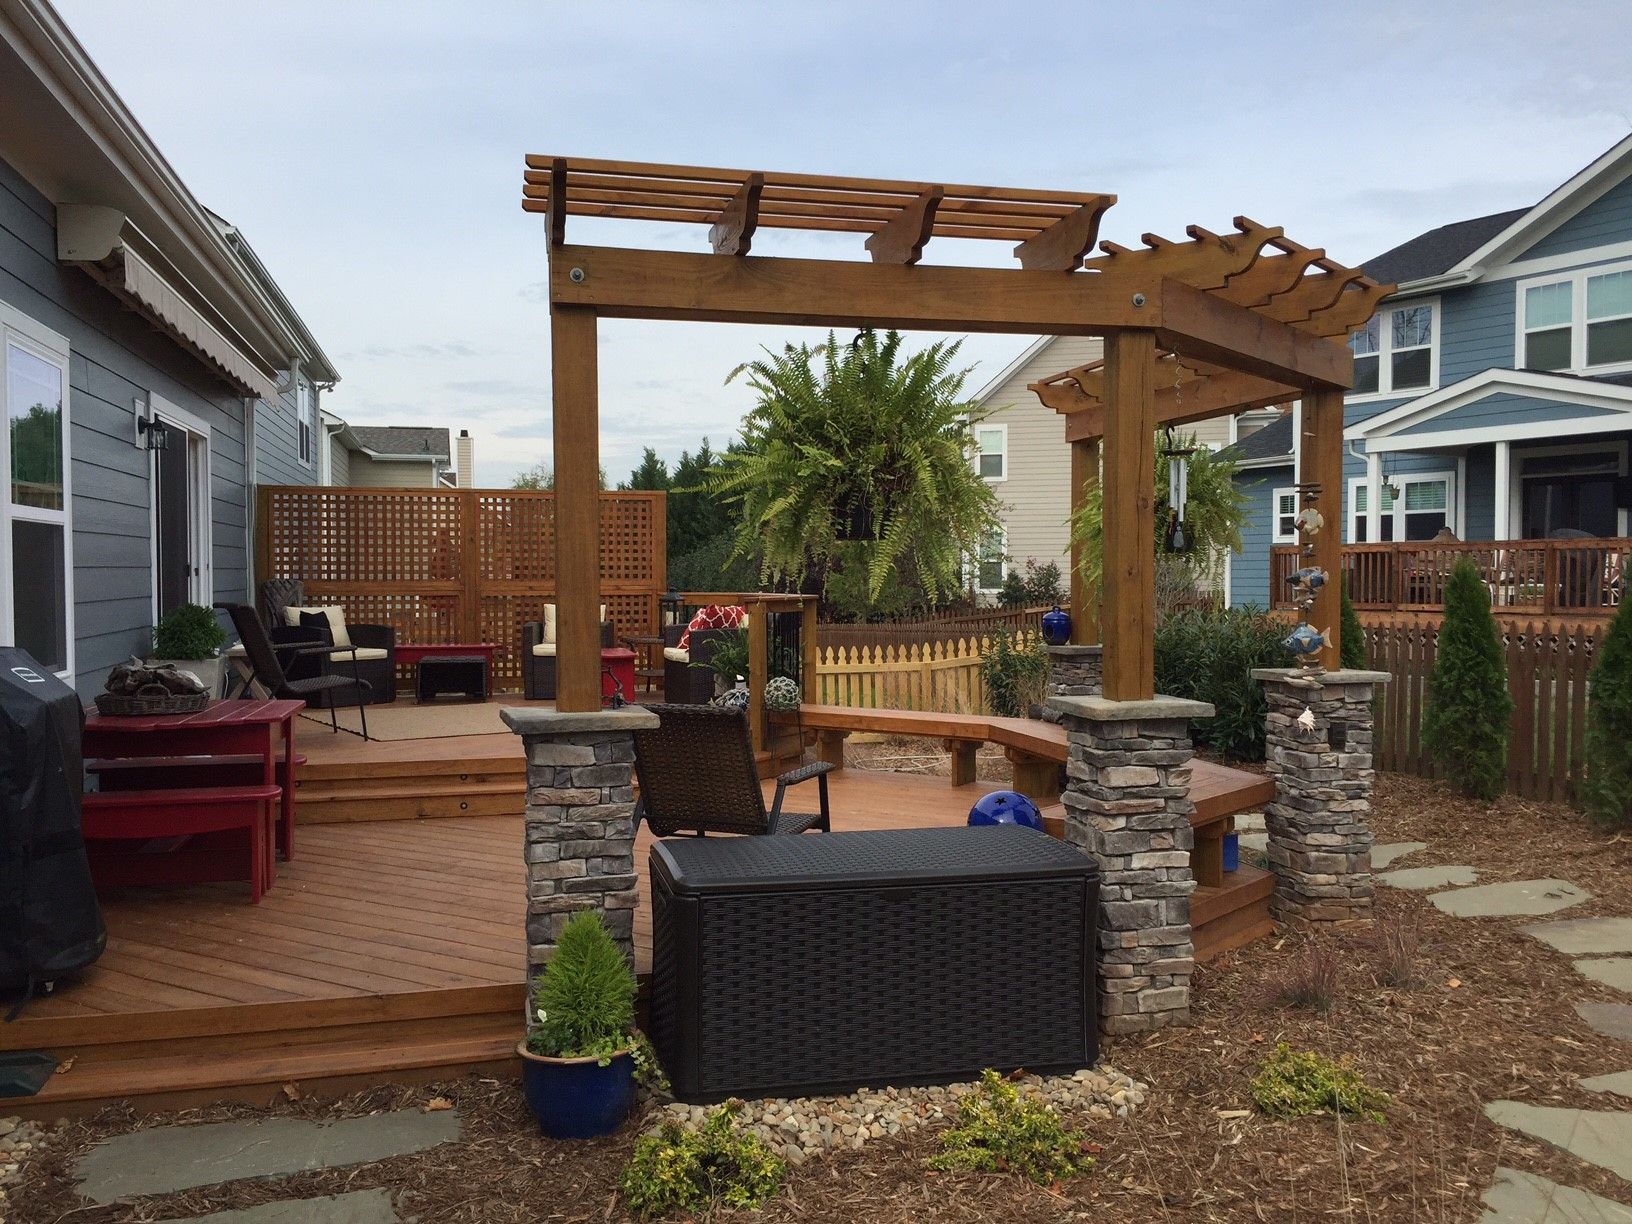 Do you see your Fort Mill dream deck design the way a deck designer does?